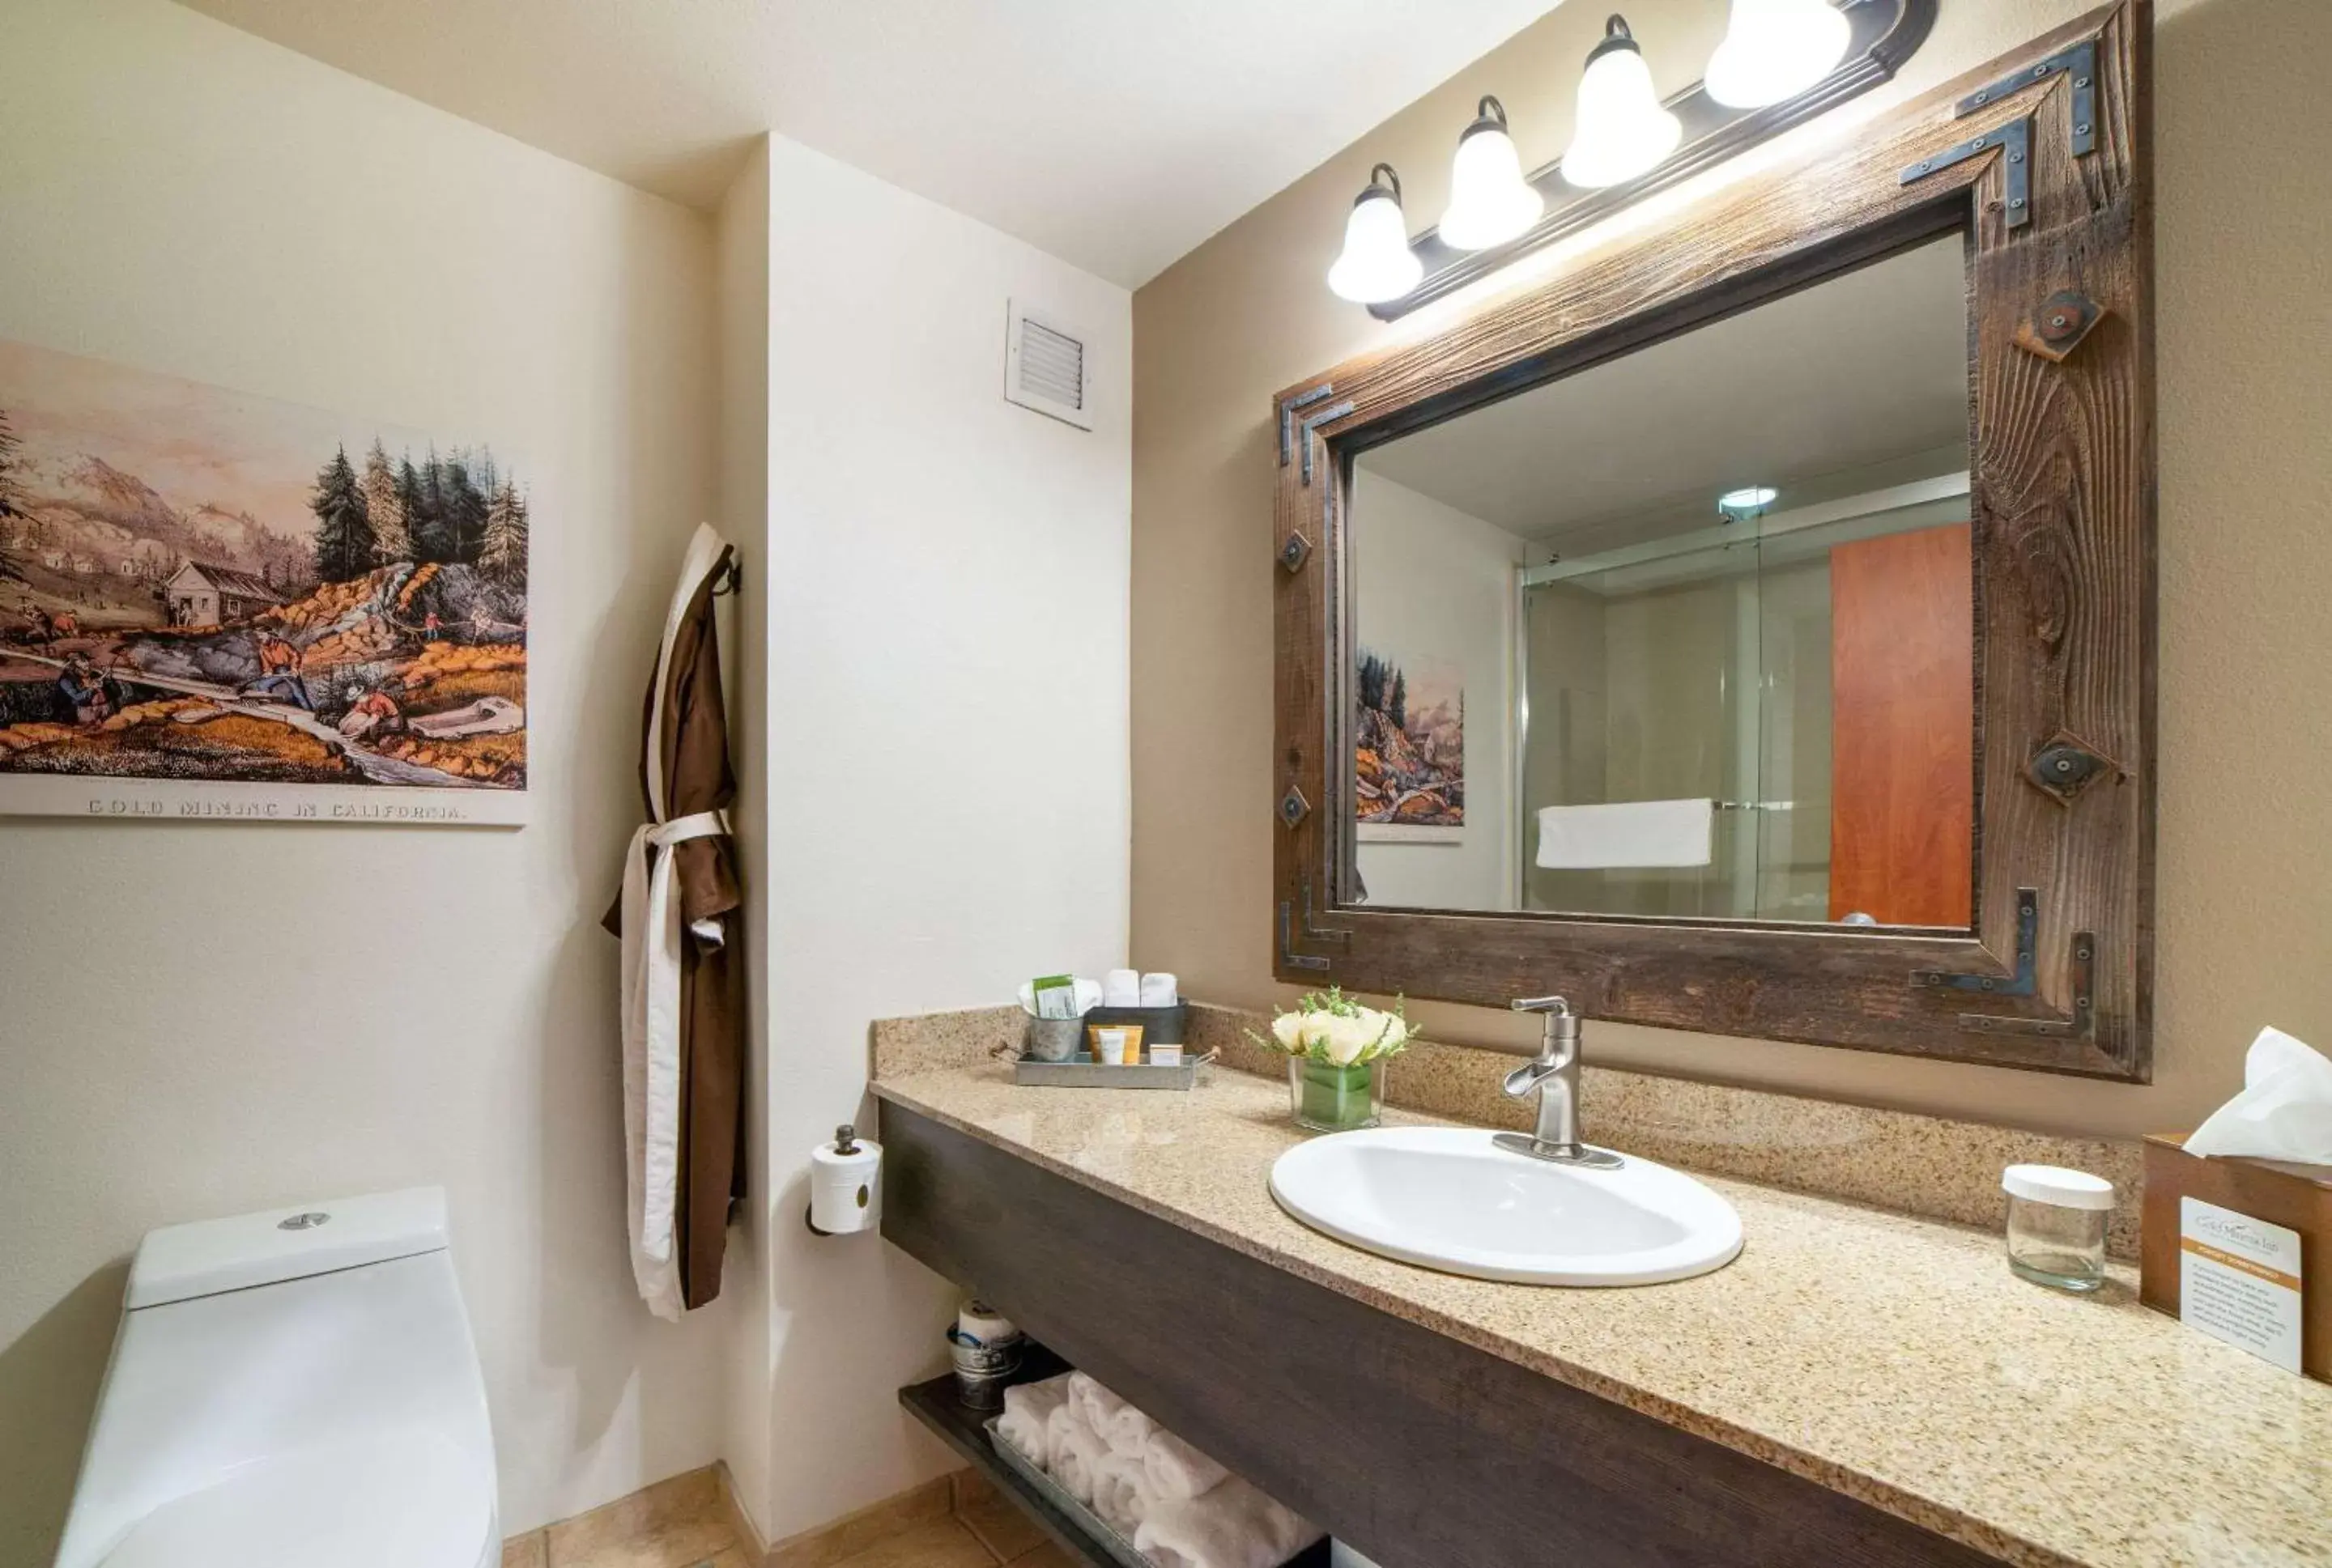 Bathroom in Gold Miners Inn, Ascend Hotel Collection